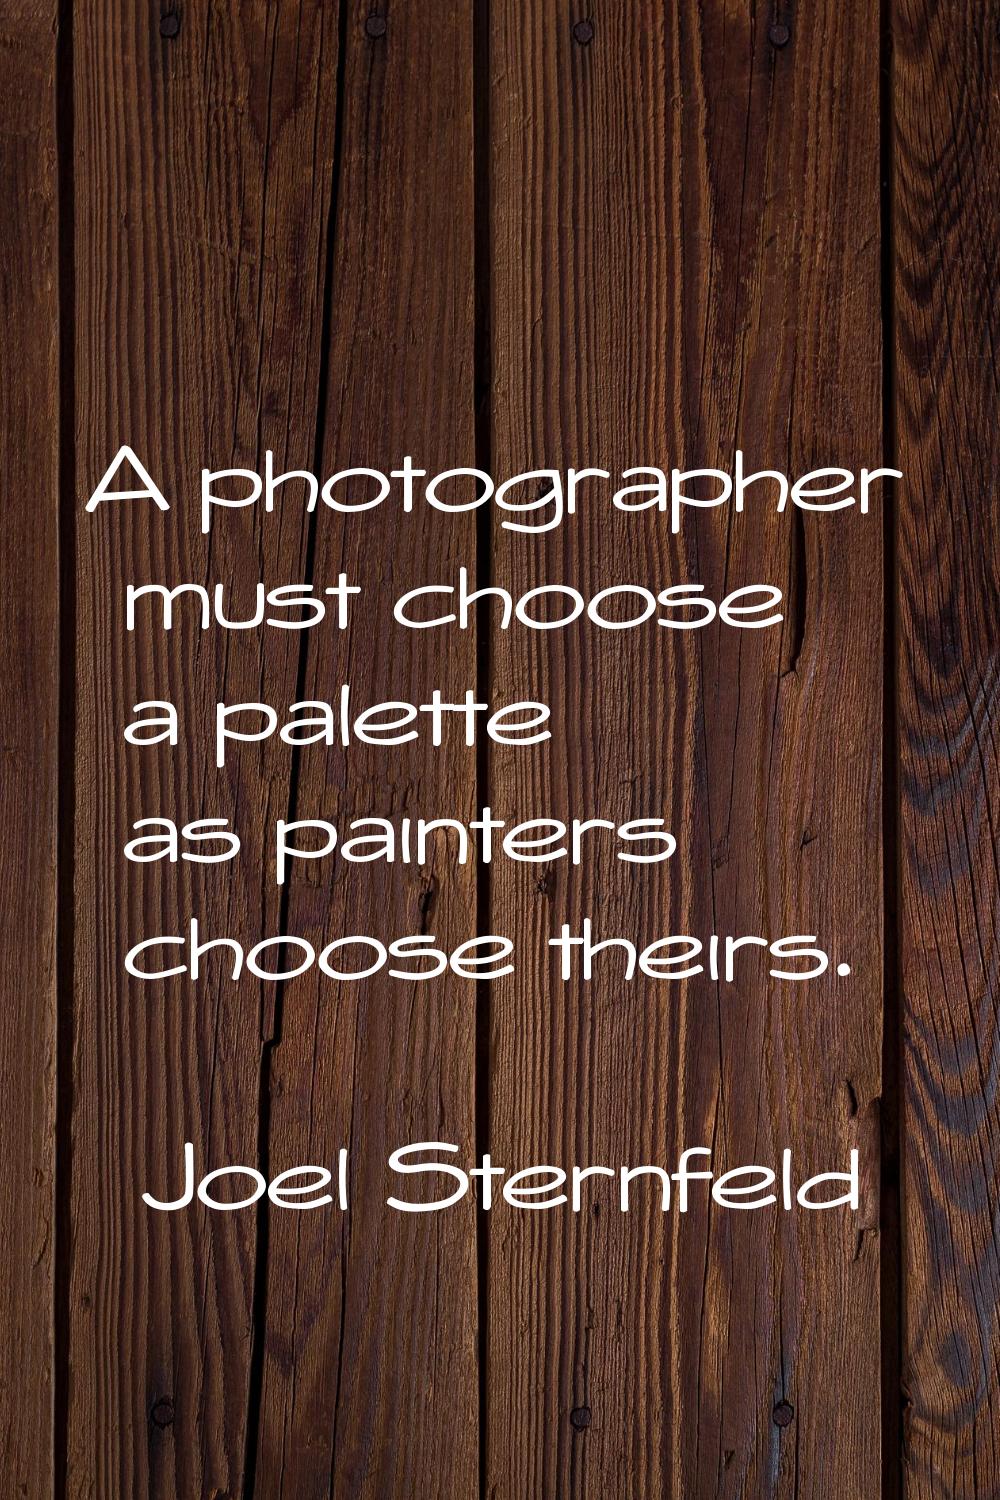 A photographer must choose a palette as painters choose theirs.